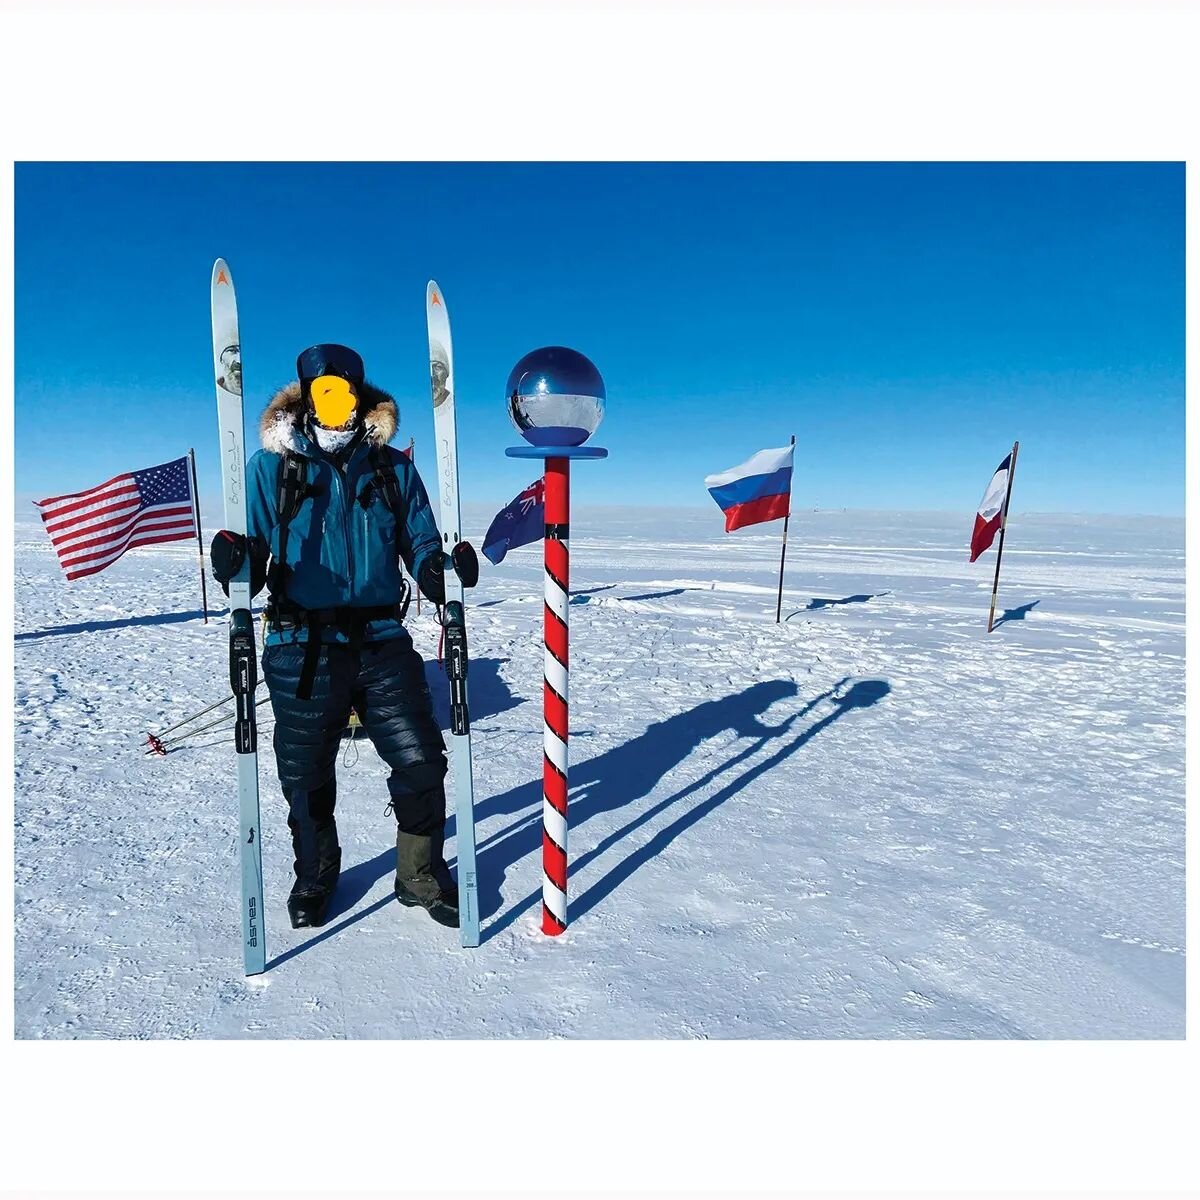 Hi George,
I had been outside of Canada for several months, on an expedition around the world.
I'm back from a solo ski expedition to the South Pole.
I am finally sending you the check for payment of $XXX.XX for my motorcycle part (invoice #XXX).
Sor